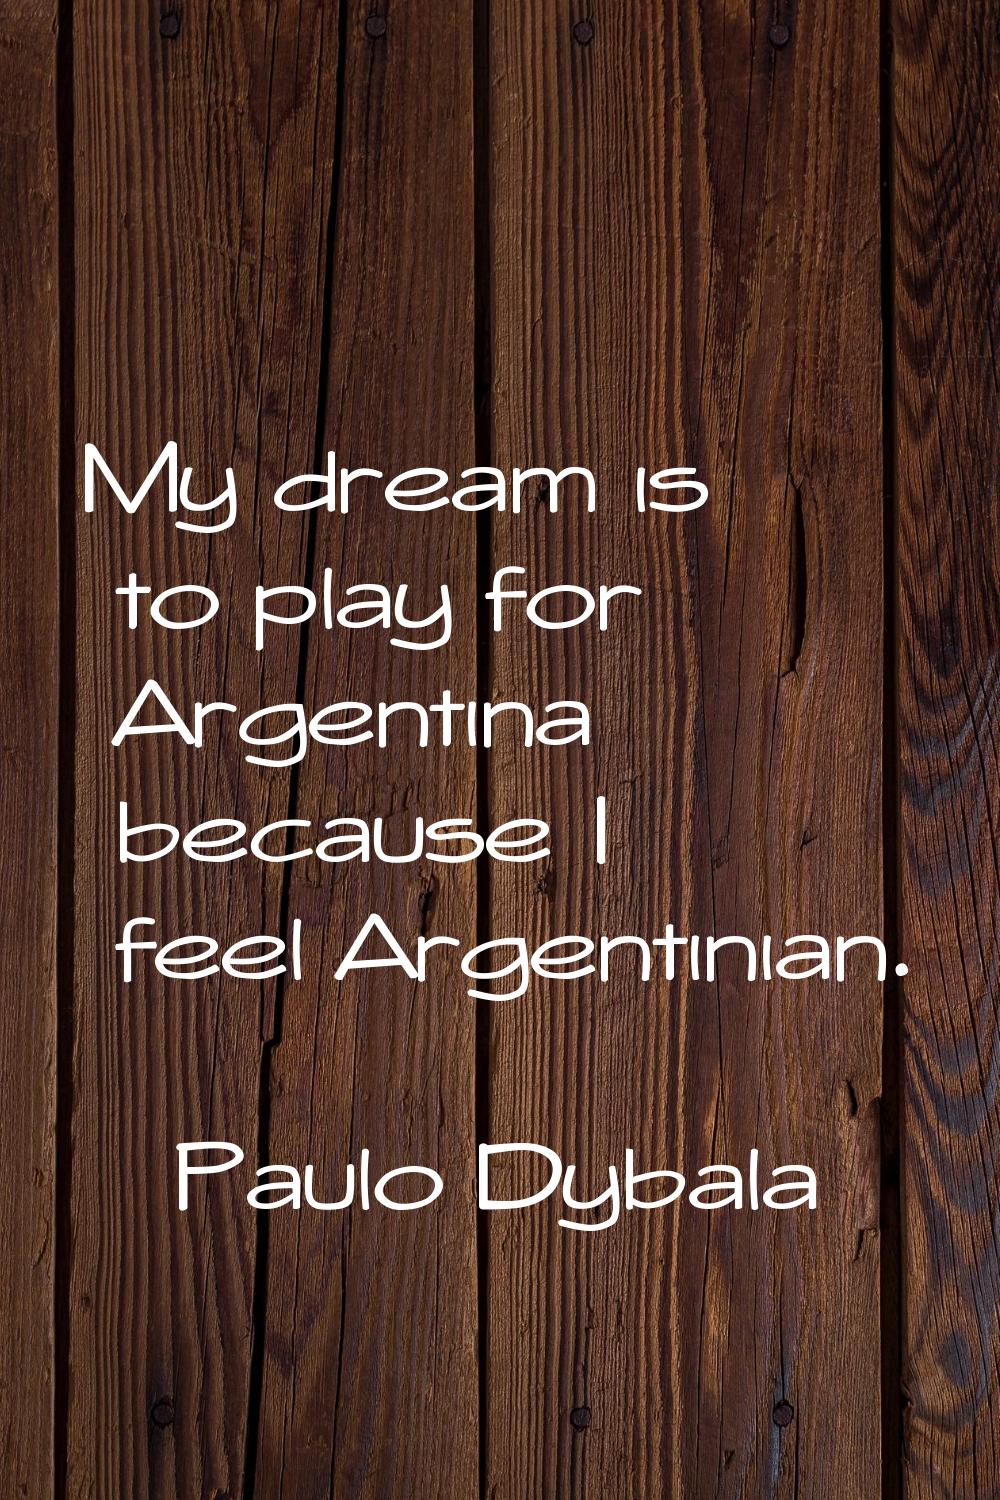 My dream is to play for Argentina because I feel Argentinian.